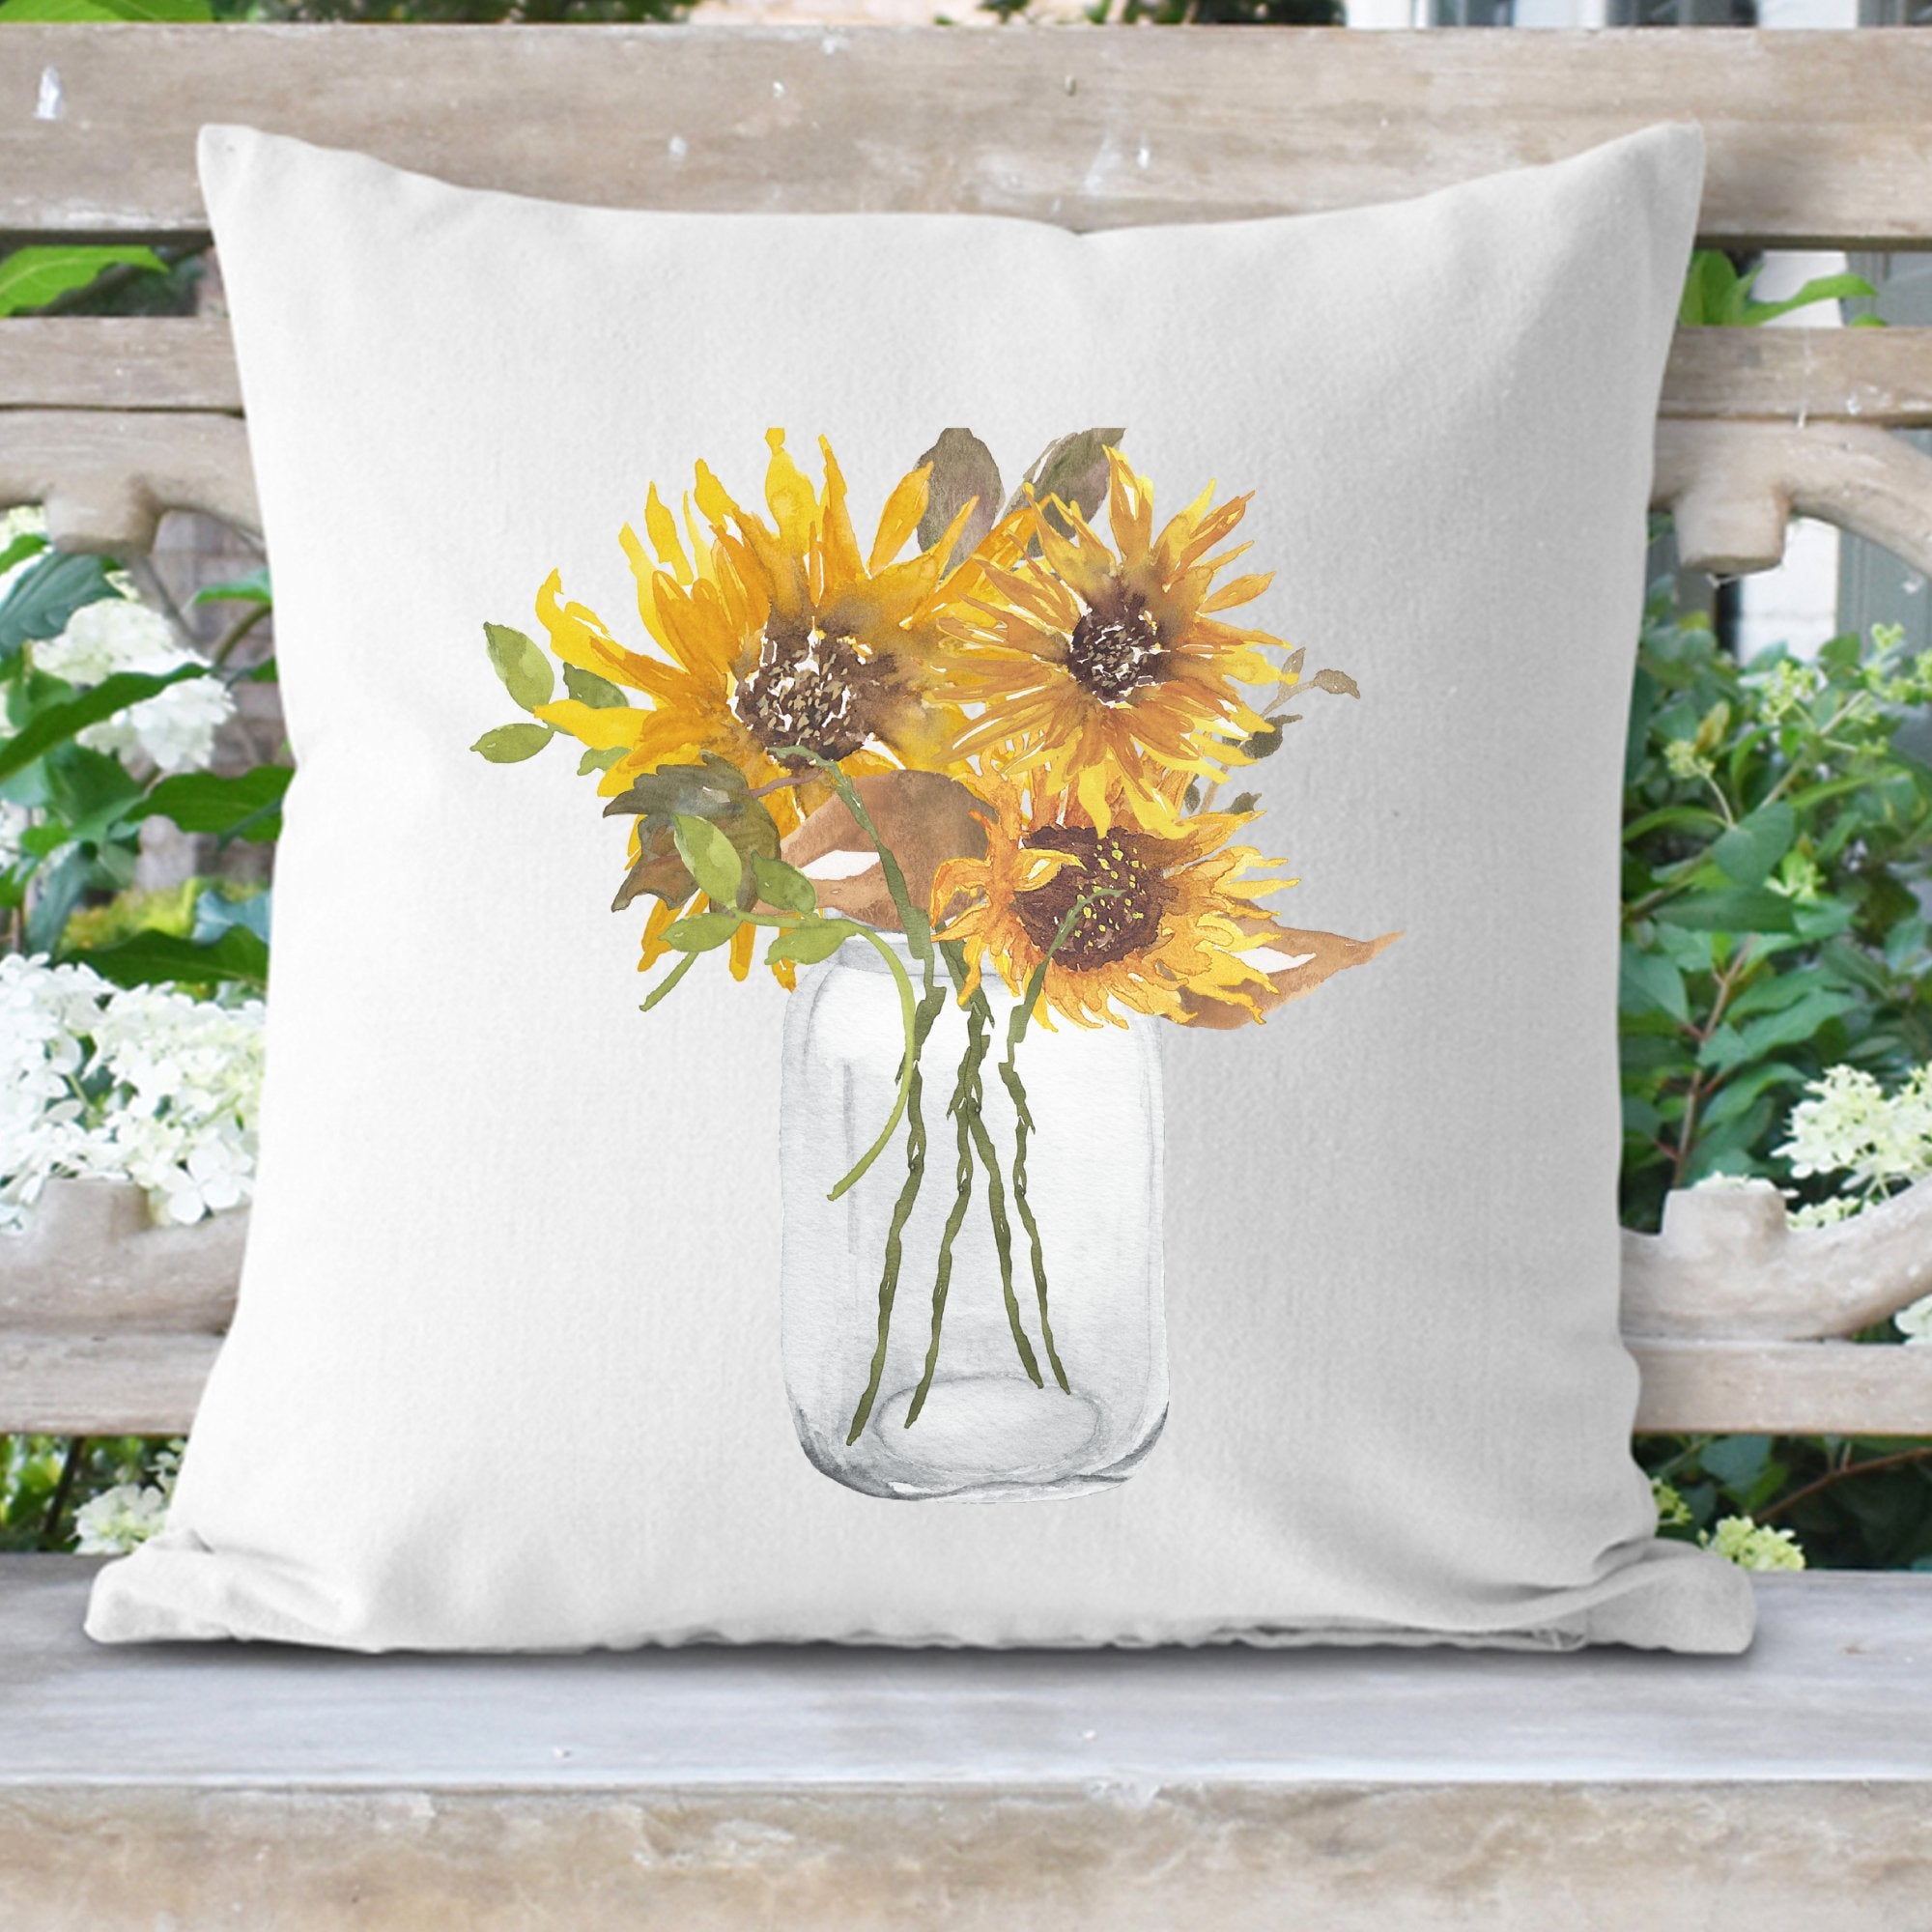 Sunflower Jar Pillow Cover - Trendznmore